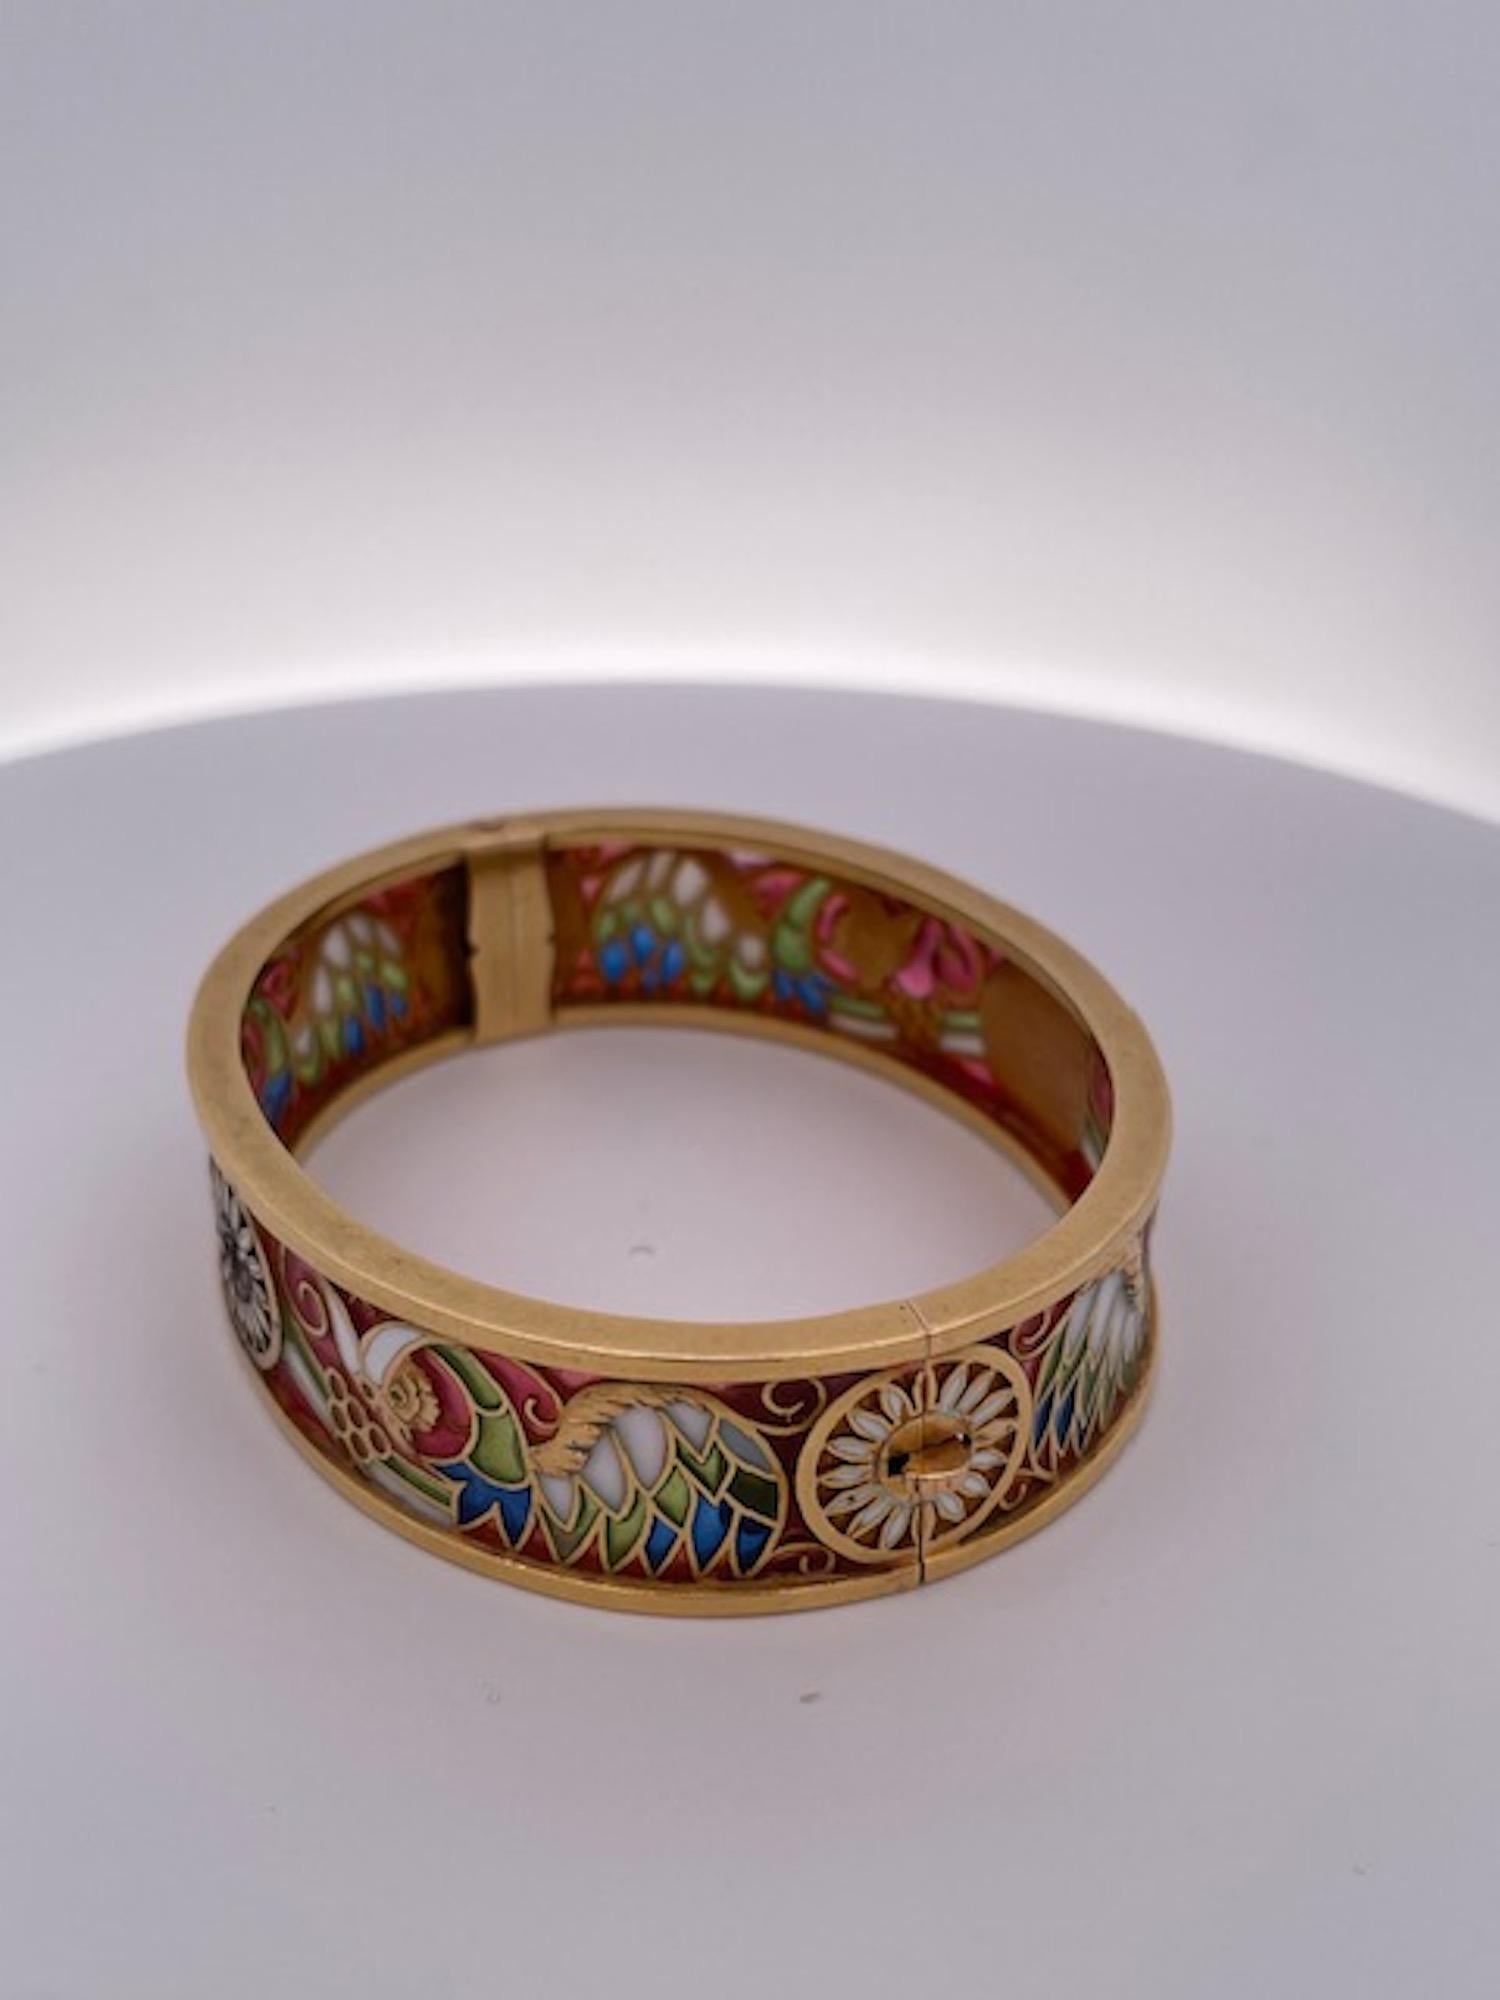 This Masriera Y Carreras Bracelet is just amazing.  These seldom come up for auction so here you go collectors of Masriera. Seldom do we find Masriera bracelets, they are very rare and due to the fact they are plique a jour these tend to break or